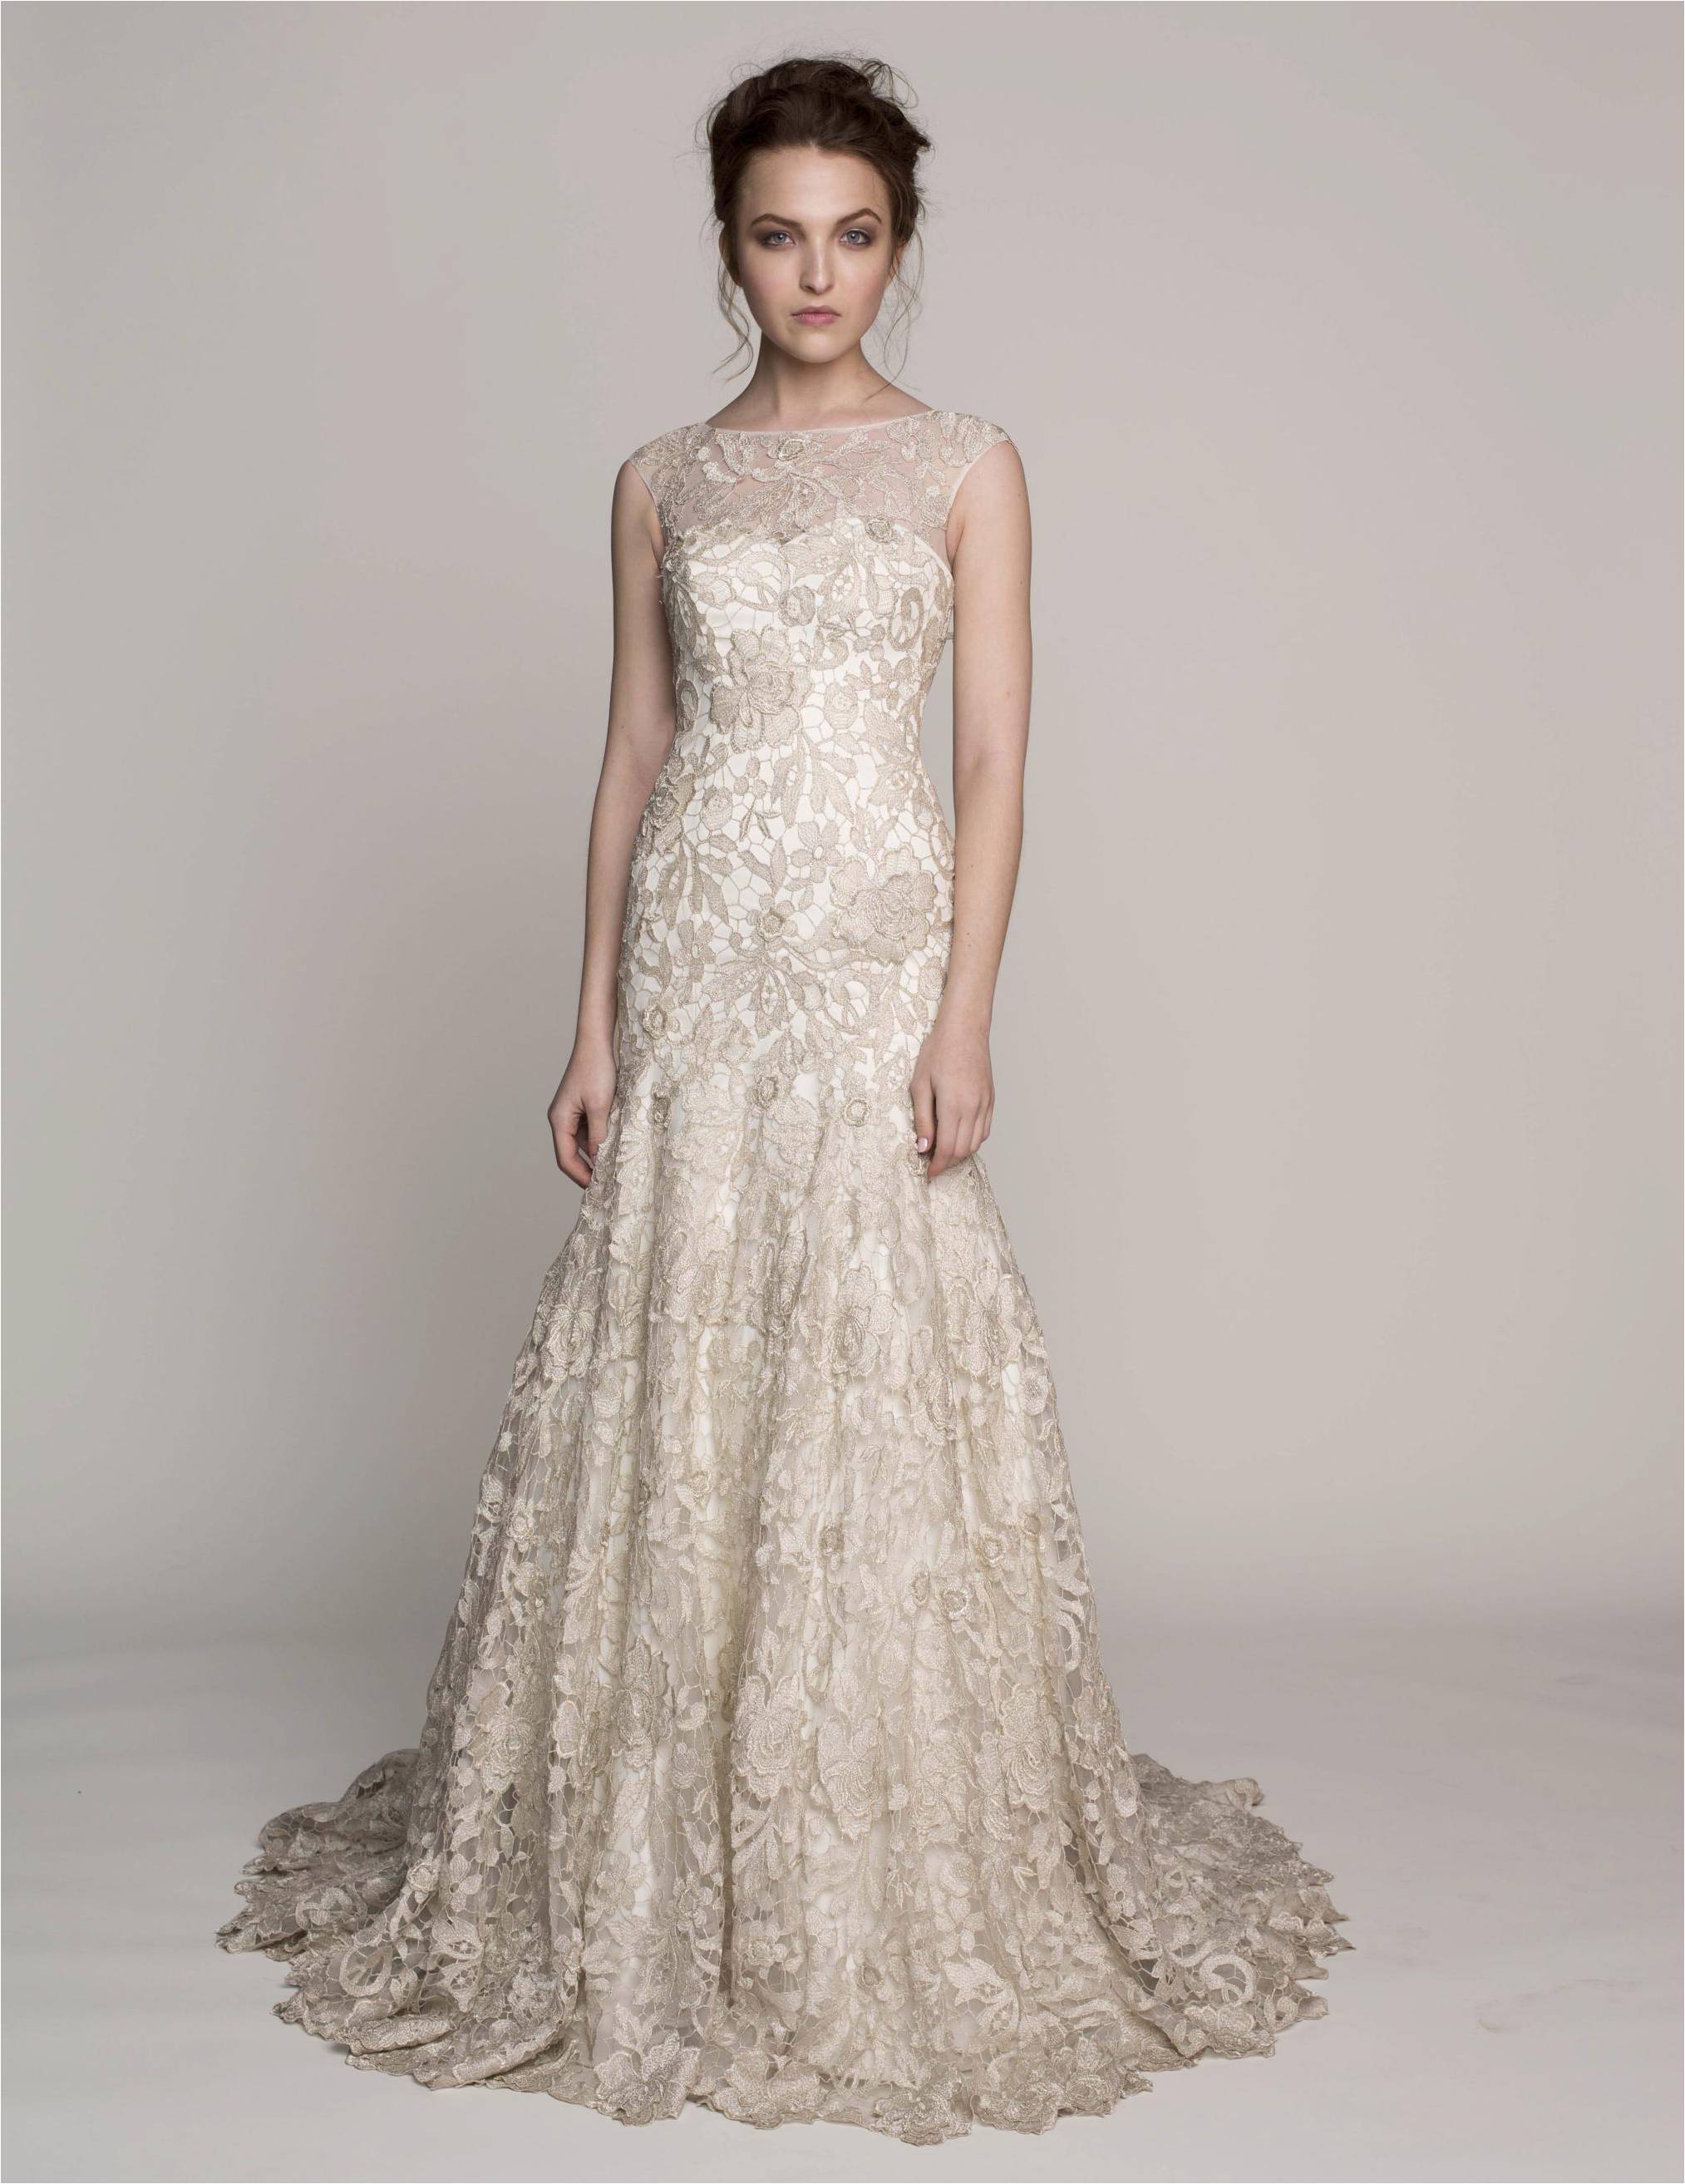 Kelly Faetanini - Spring 2014 Collection - Wedding Dresses